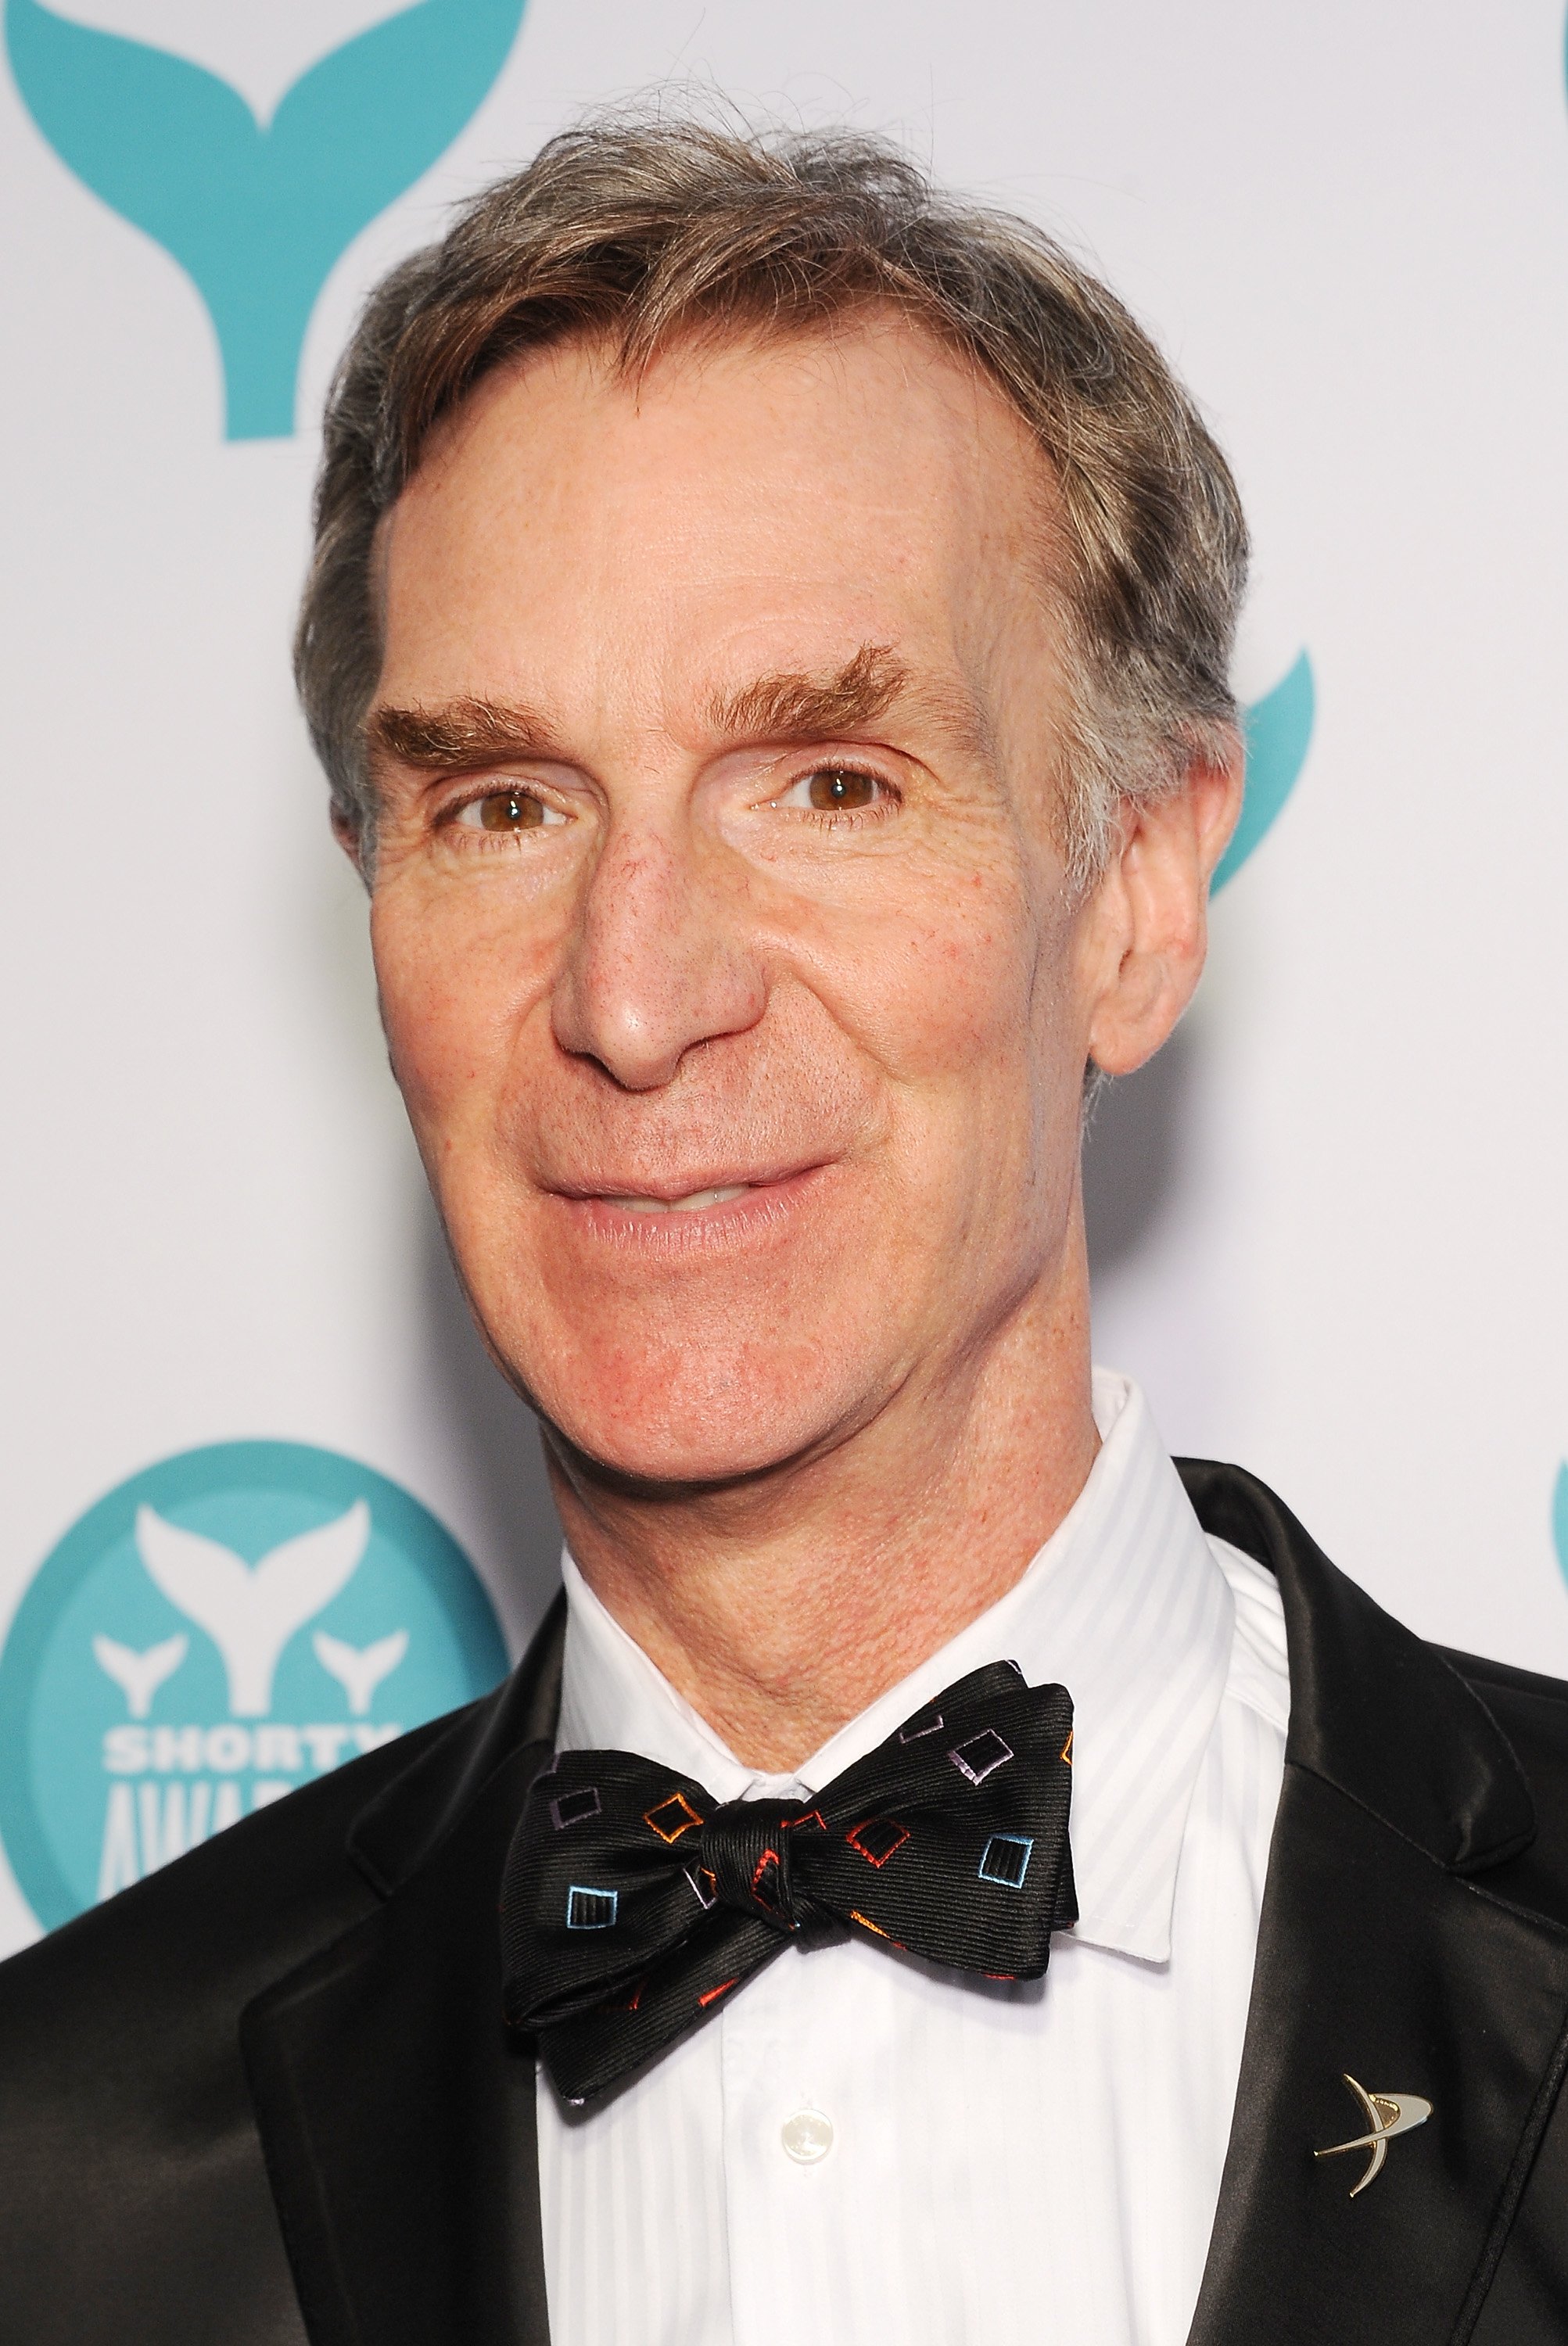 Bill Nye attends The 7th Annual Shorty Awards on April 20, 2015 in New York City. (D Dipasupil—Getty Images for The Shortly Awards)